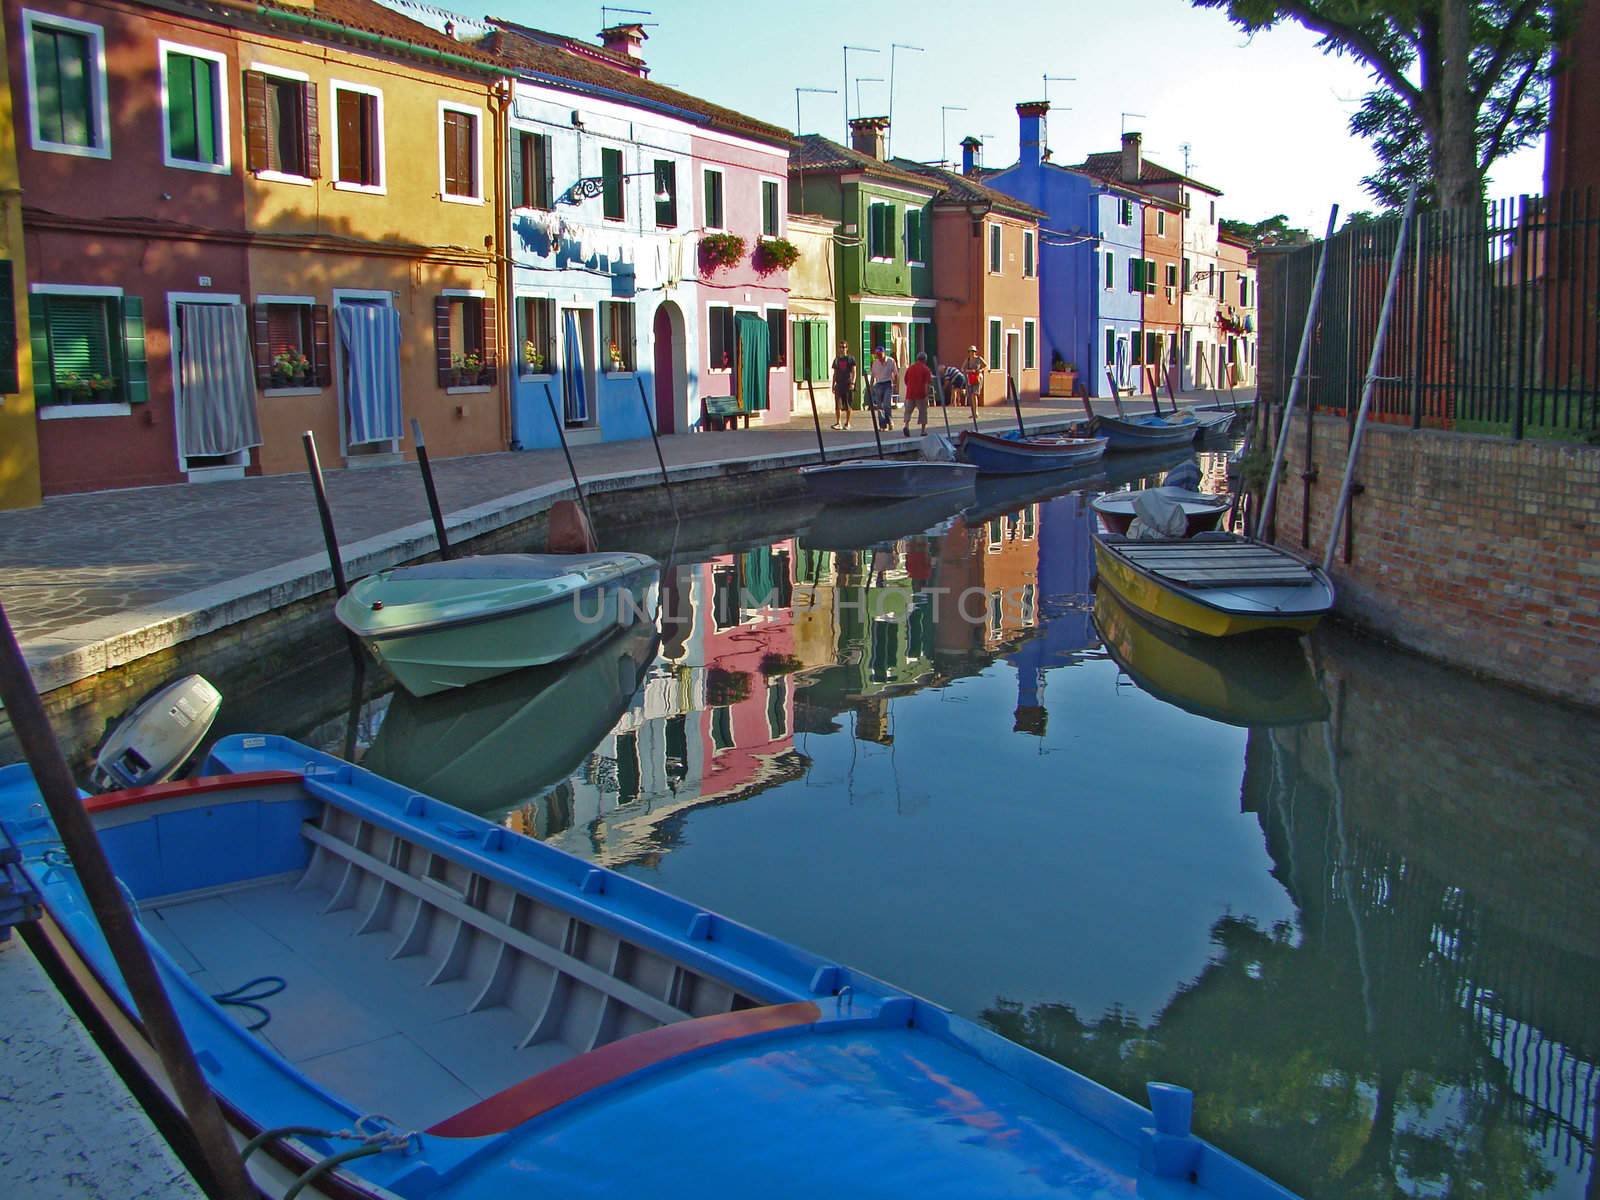   houses on Burano          by mkistryn